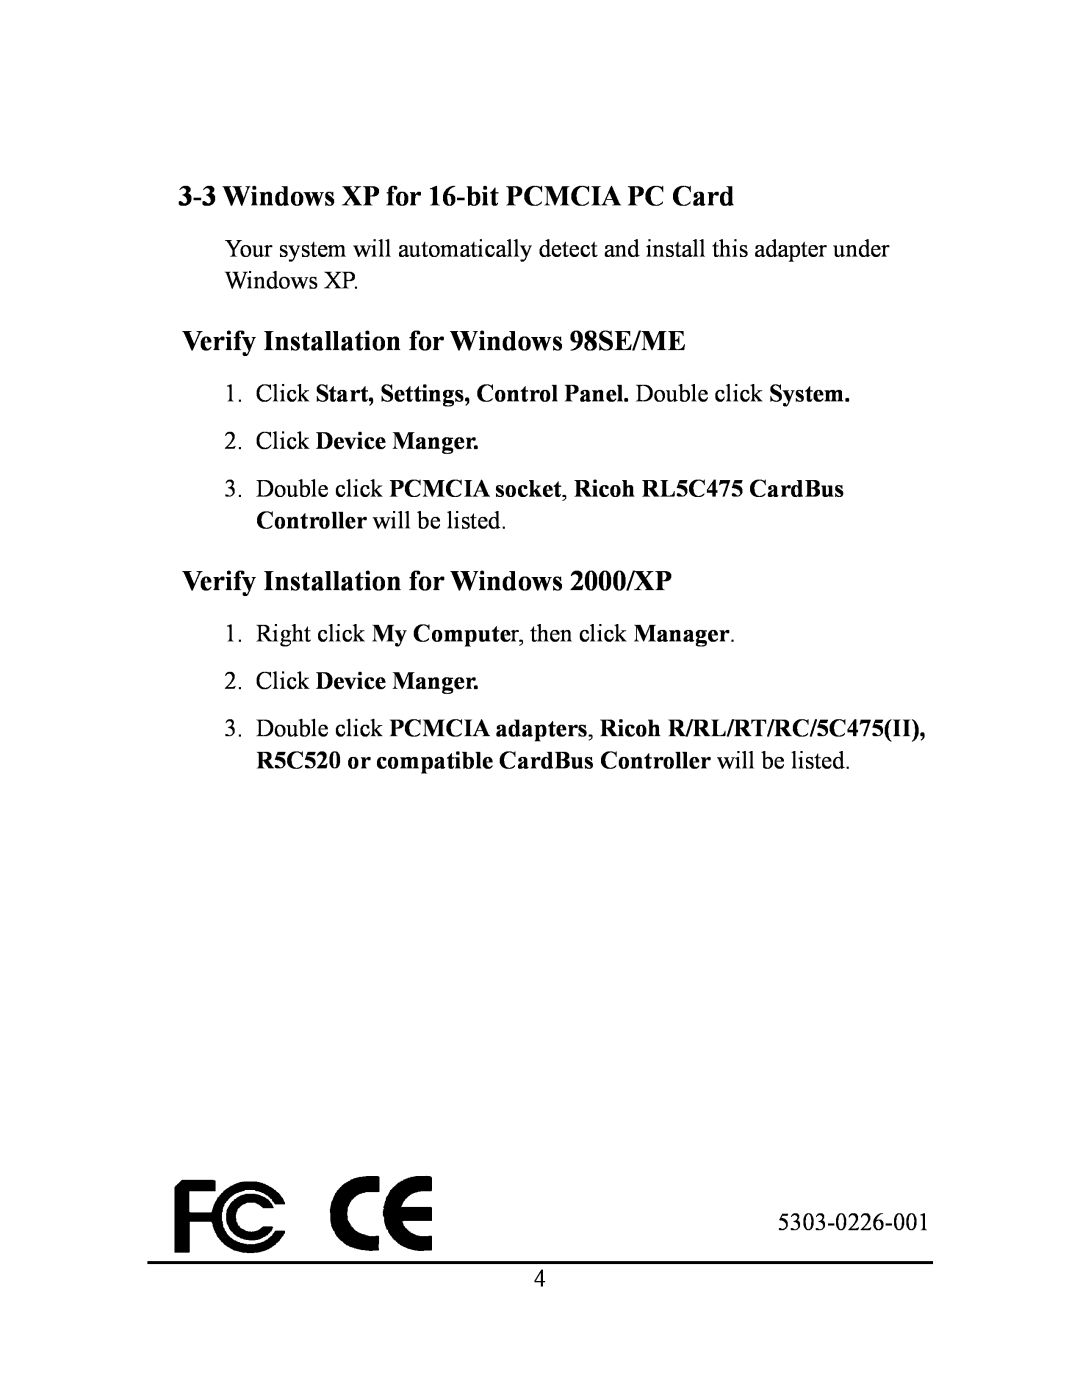 Ricoh PCI-to-PC Card Adapter manual Windows XP for 16-bit PCMCIA PC Card, Verify Installation for Windows 98SE/ME 